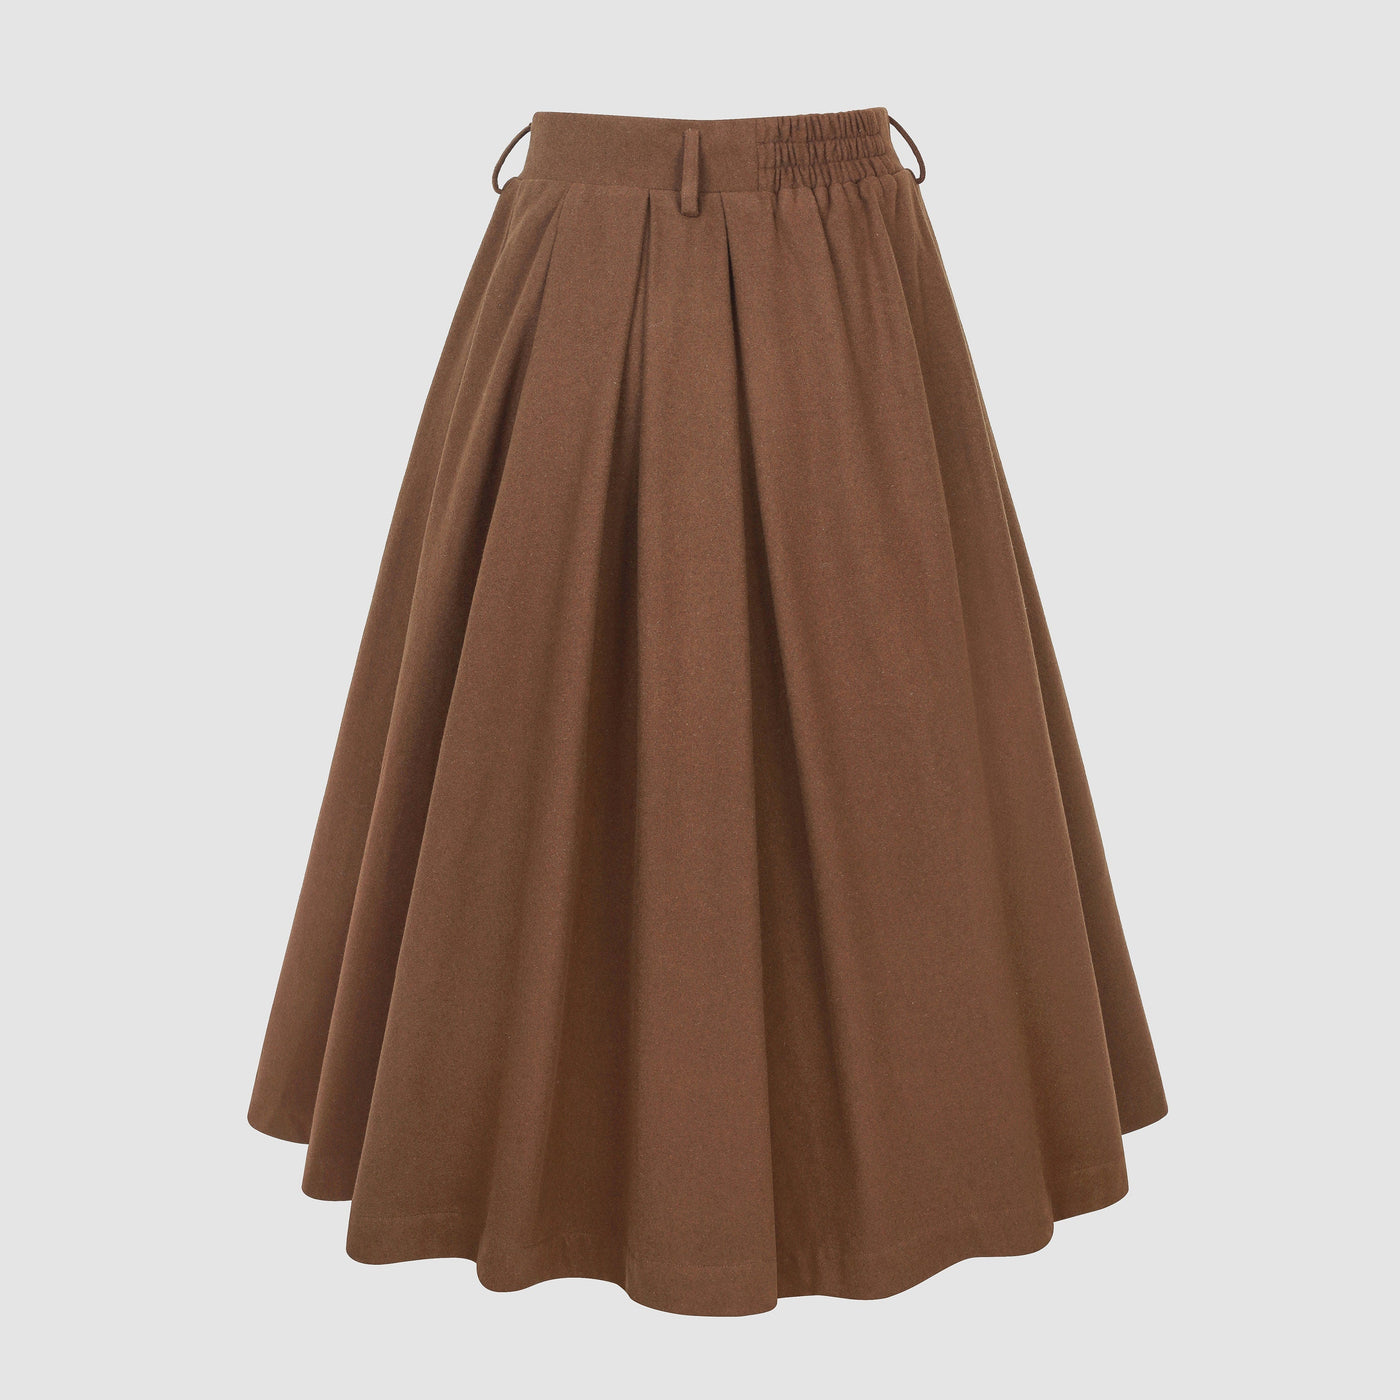 Naomi 33 | buttoned up wool skirt in brown